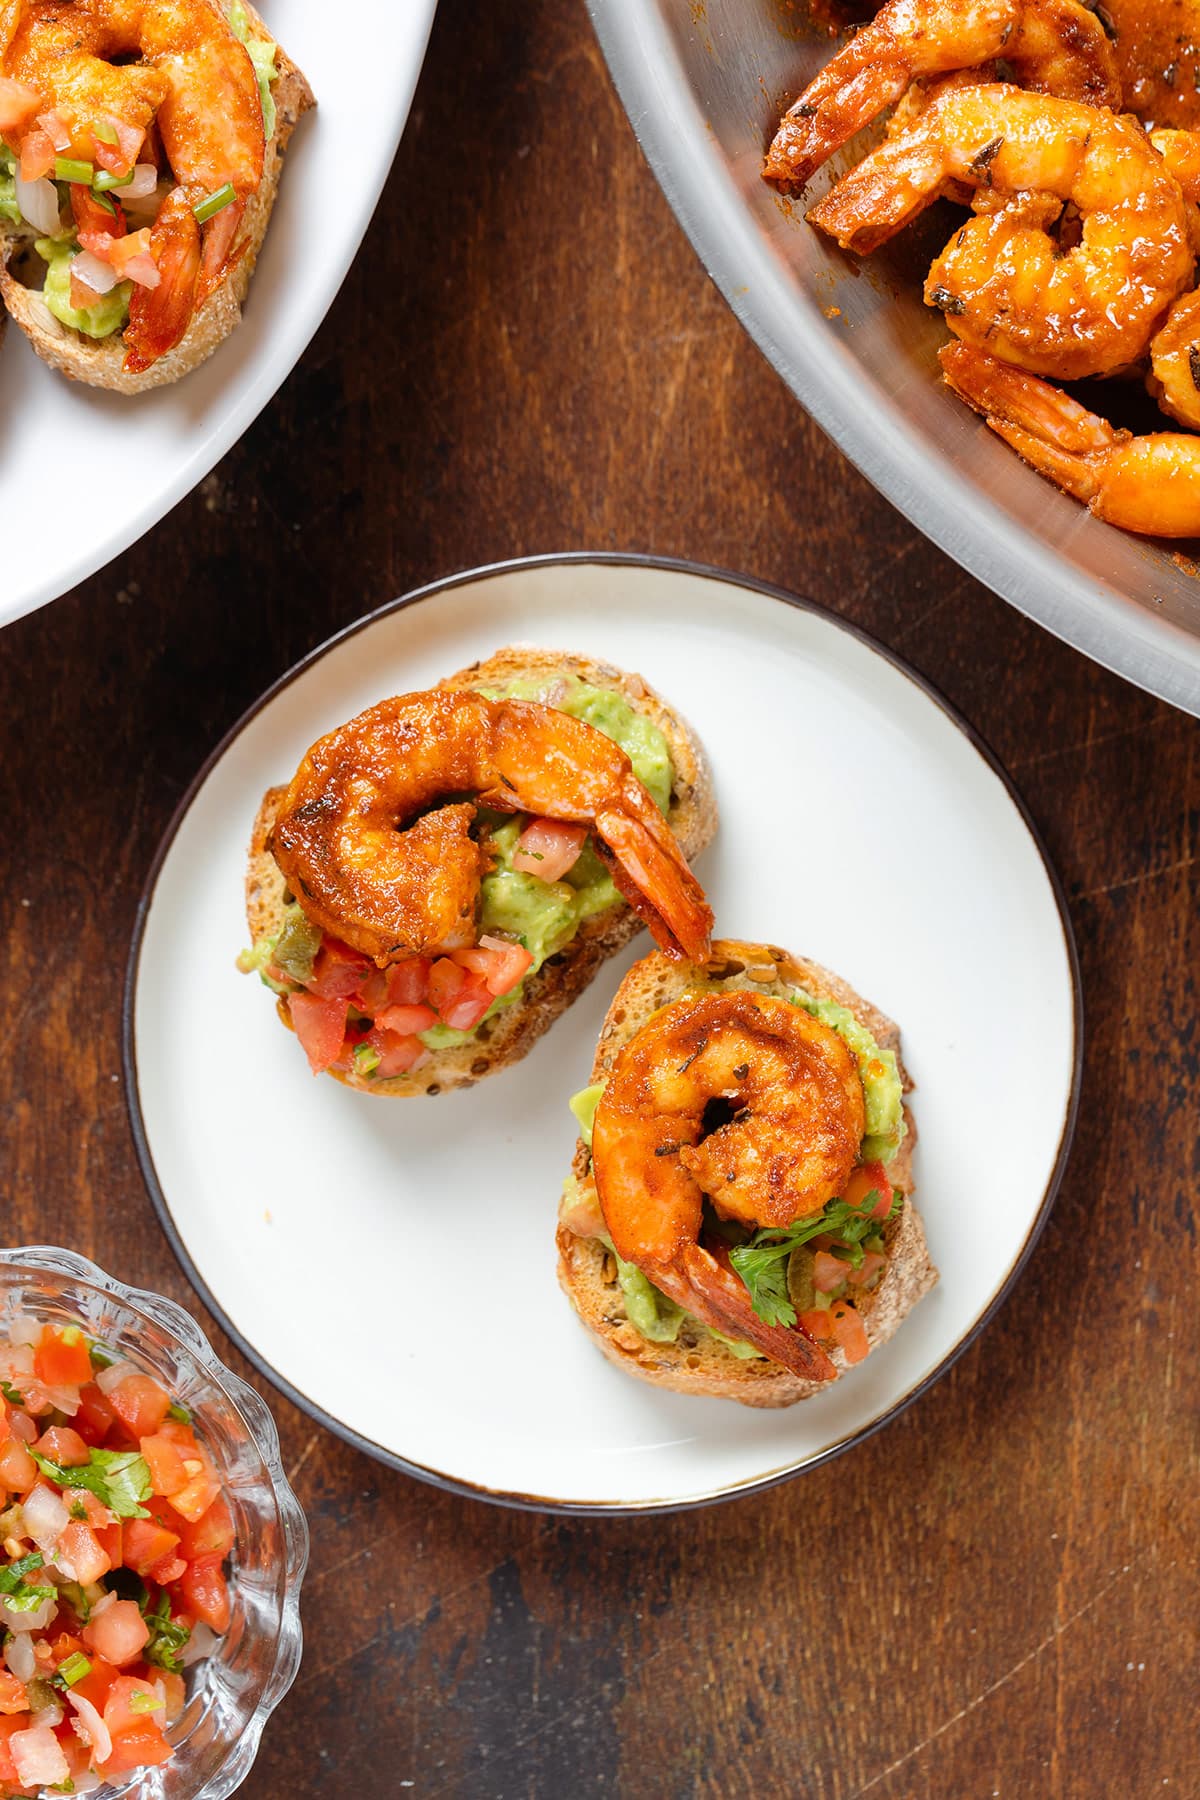 Toasted baguette slices topped with guacamole, fresh salsa, and cajun shrimp on a small plate.